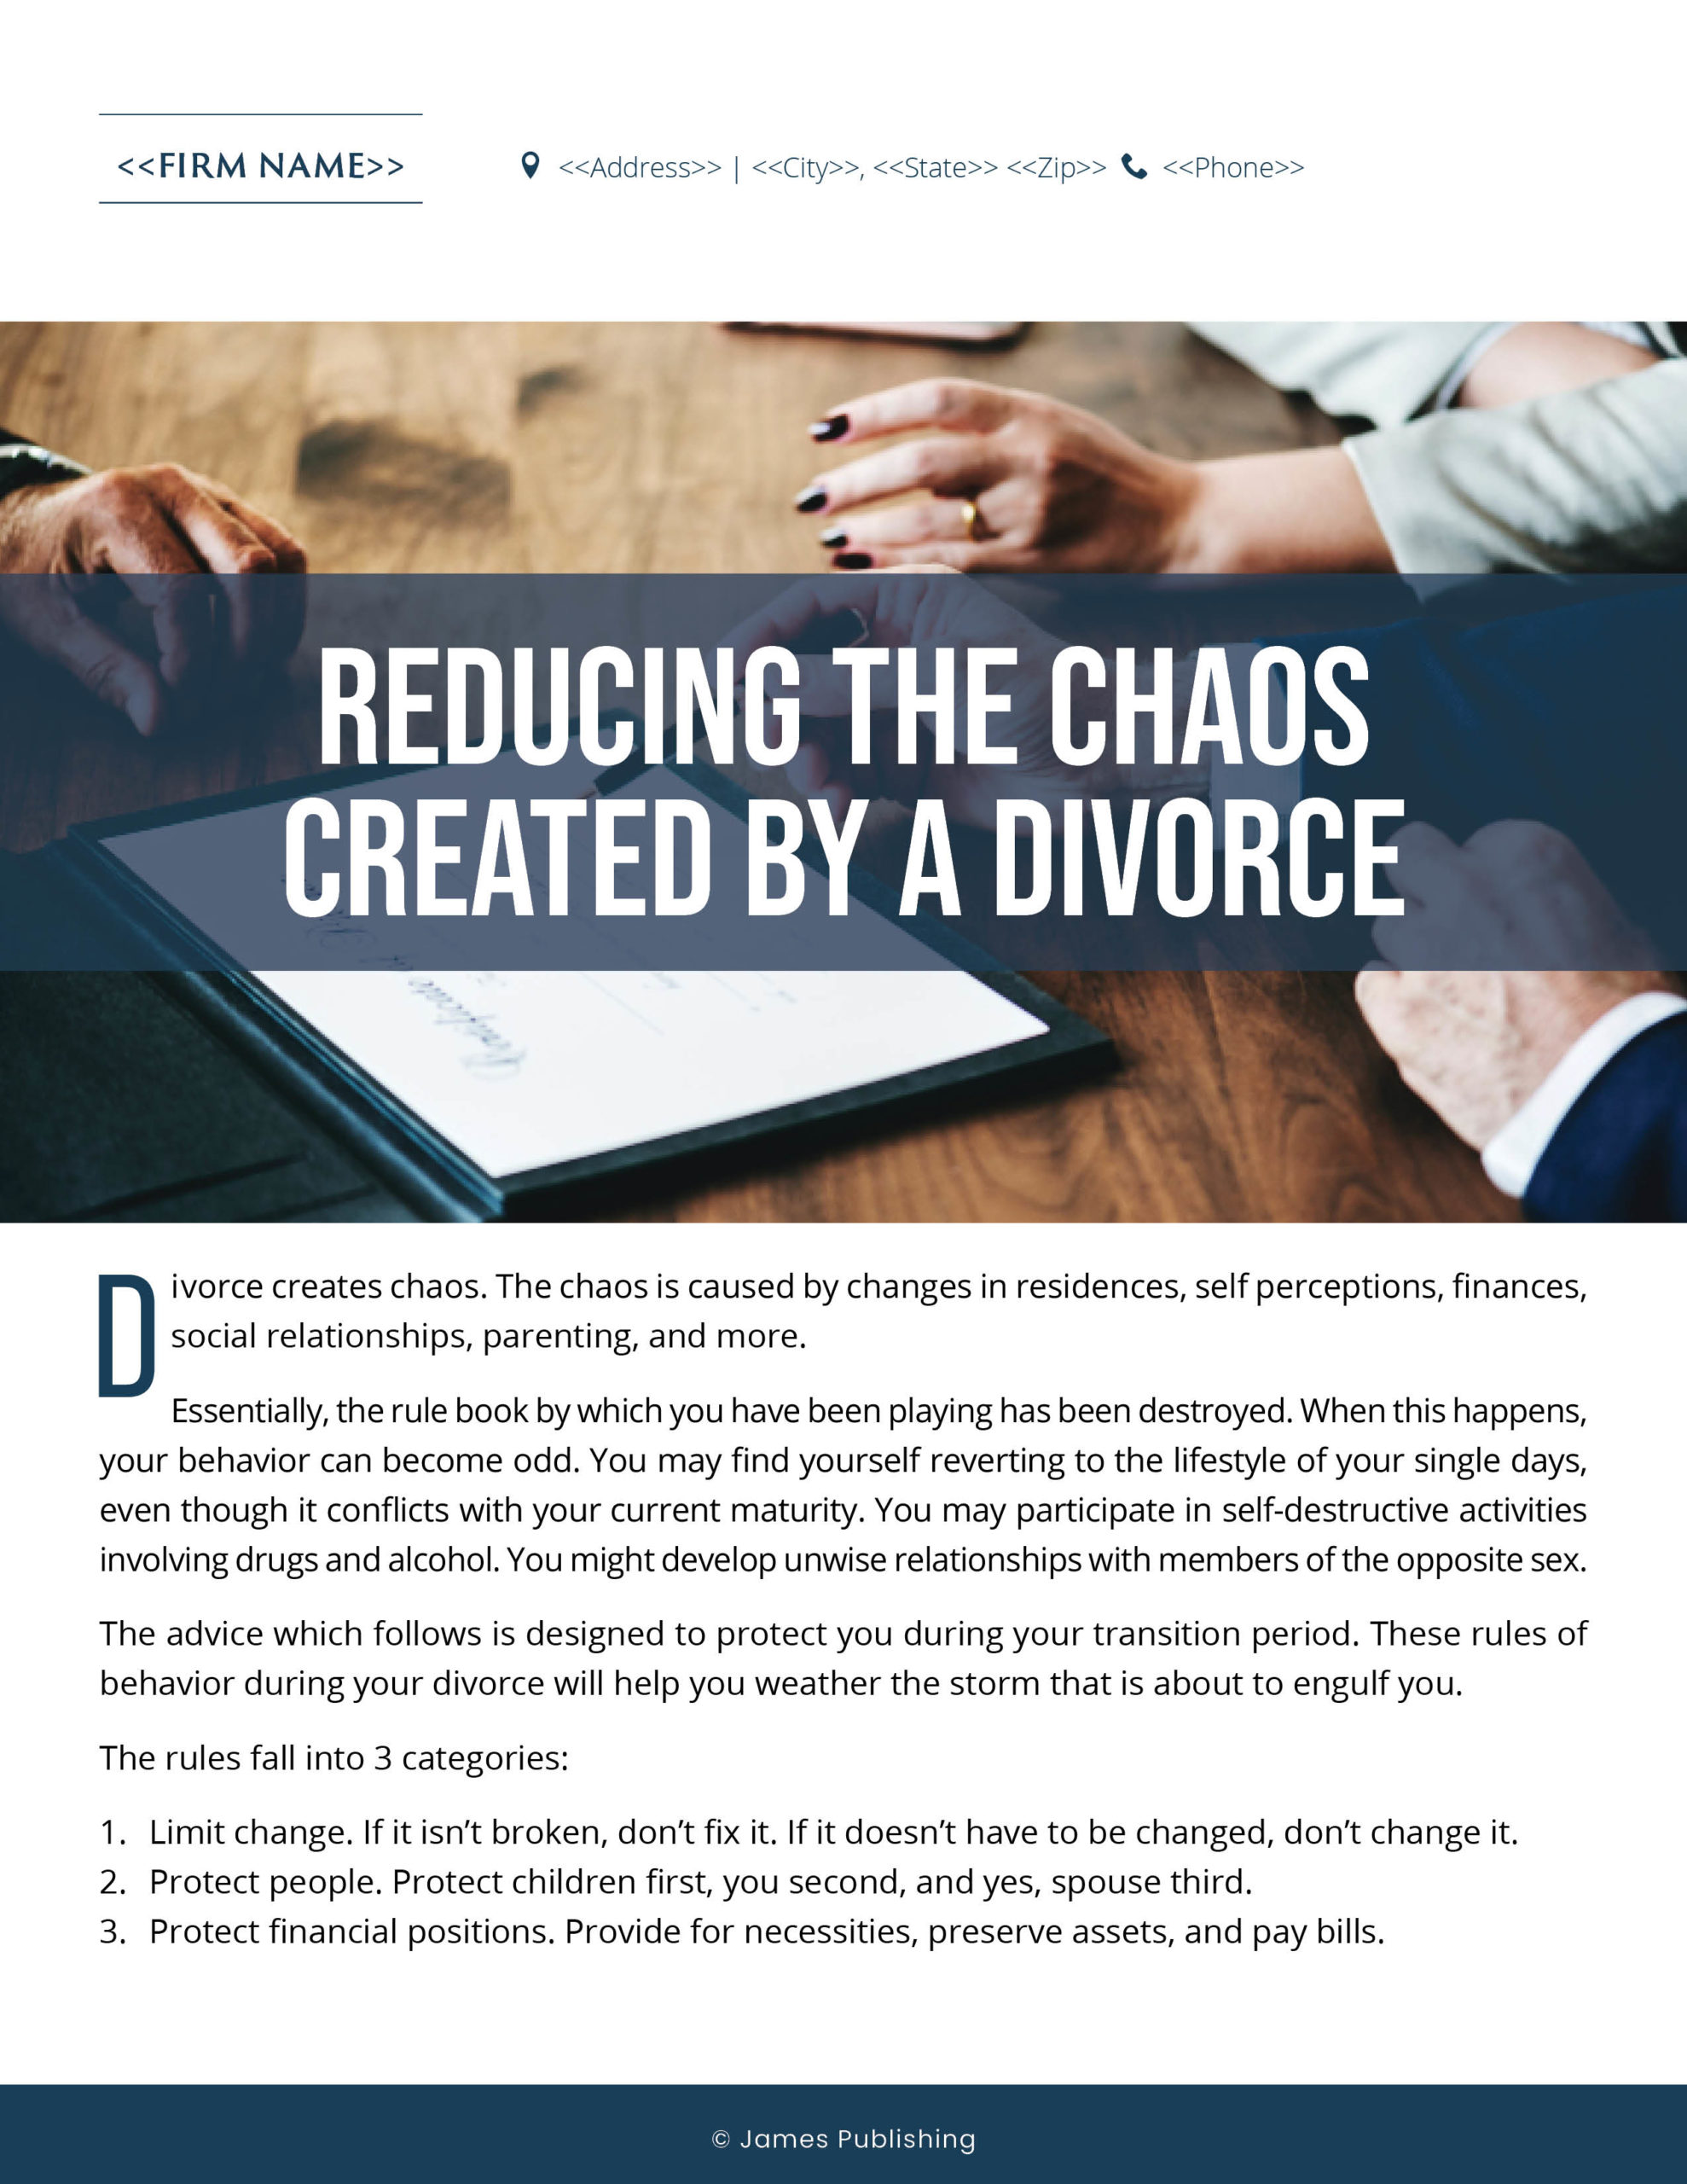 FAM-09 Reducing the Chaos Created by a Divorce